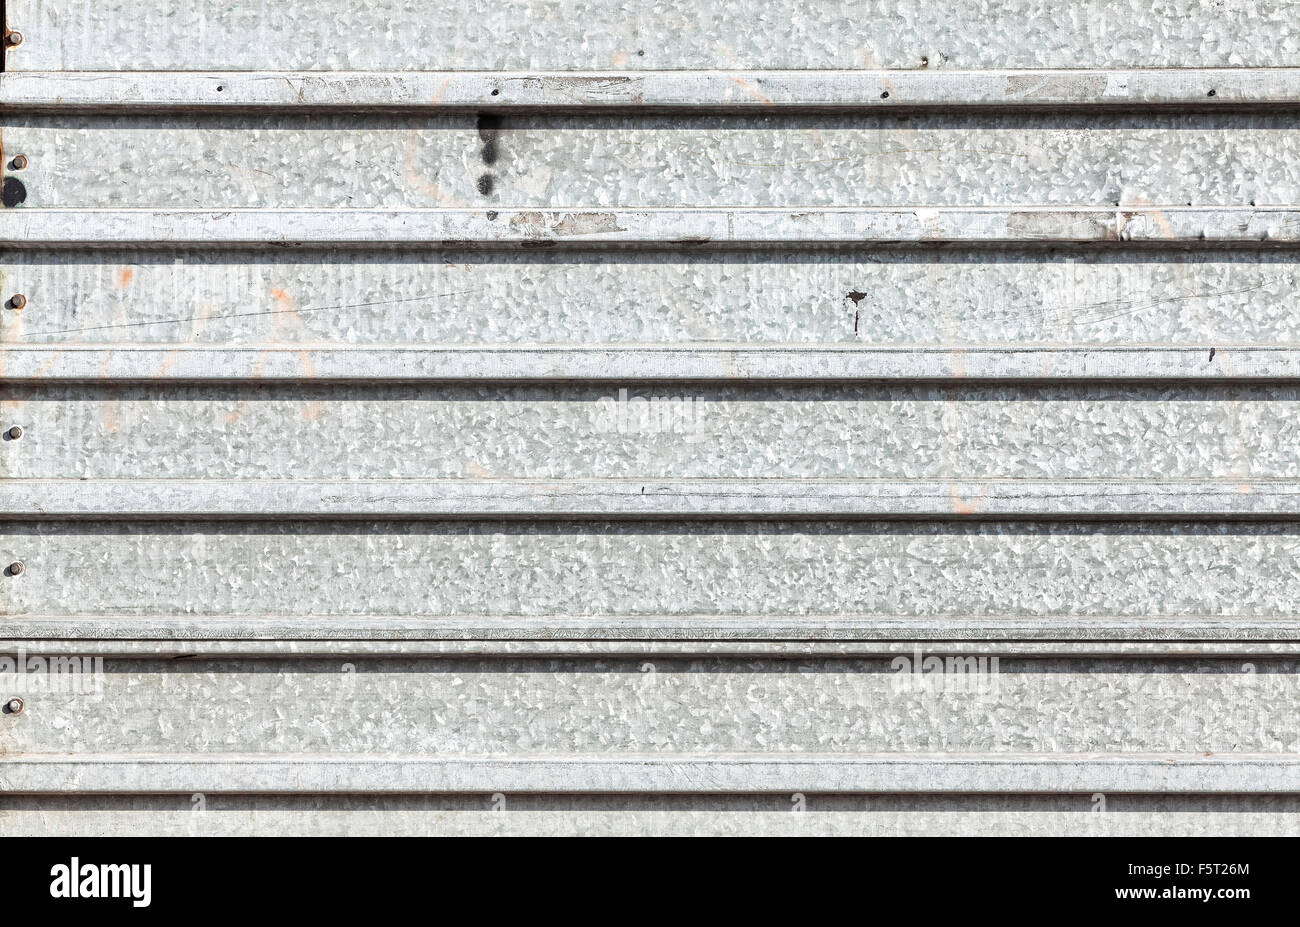 Grunge corrugated metal texture, abstract industrial background. Stock Photo